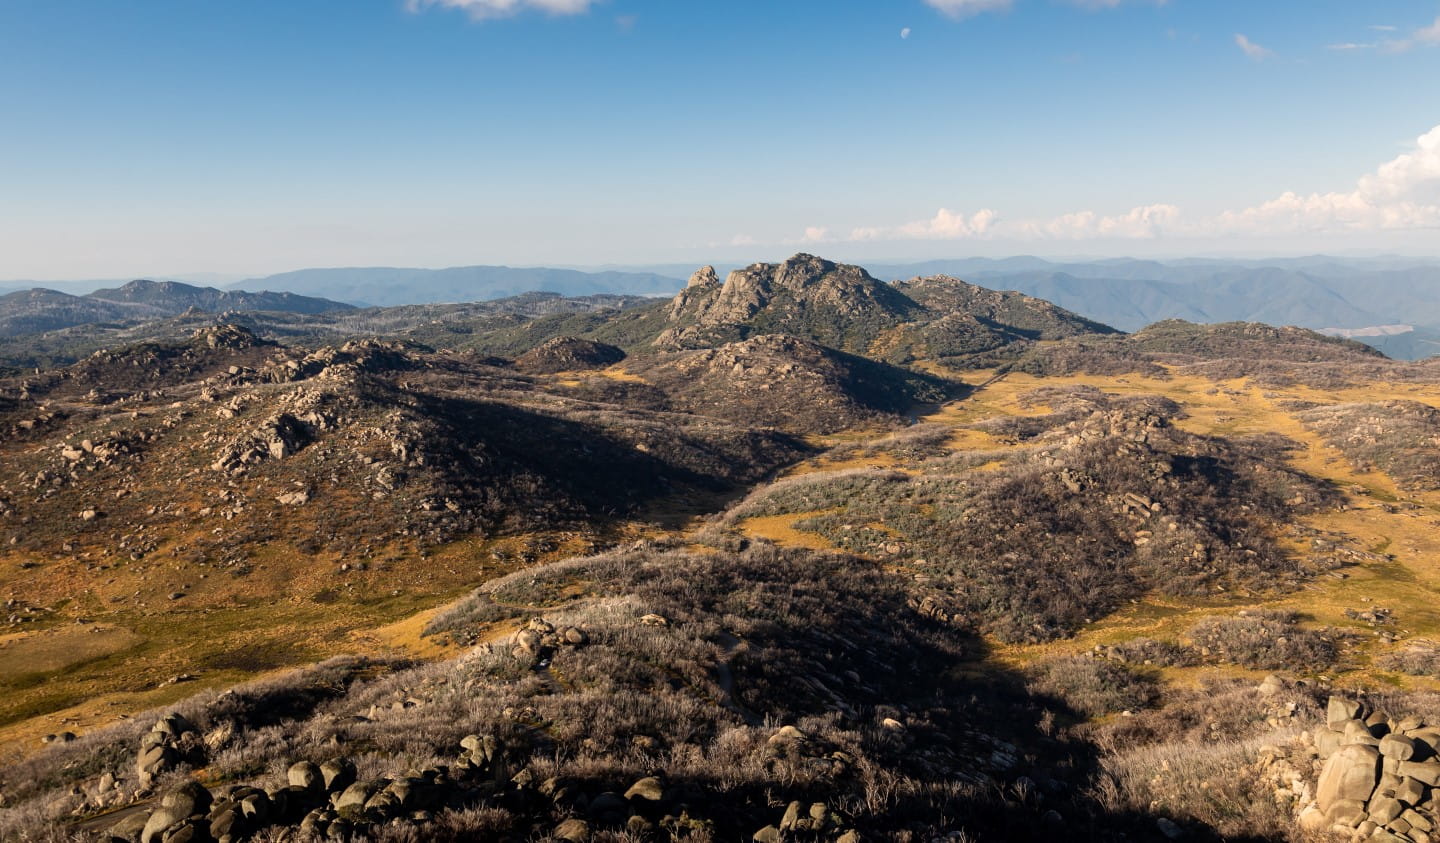 The view of Mount Buffalo from The Horn.